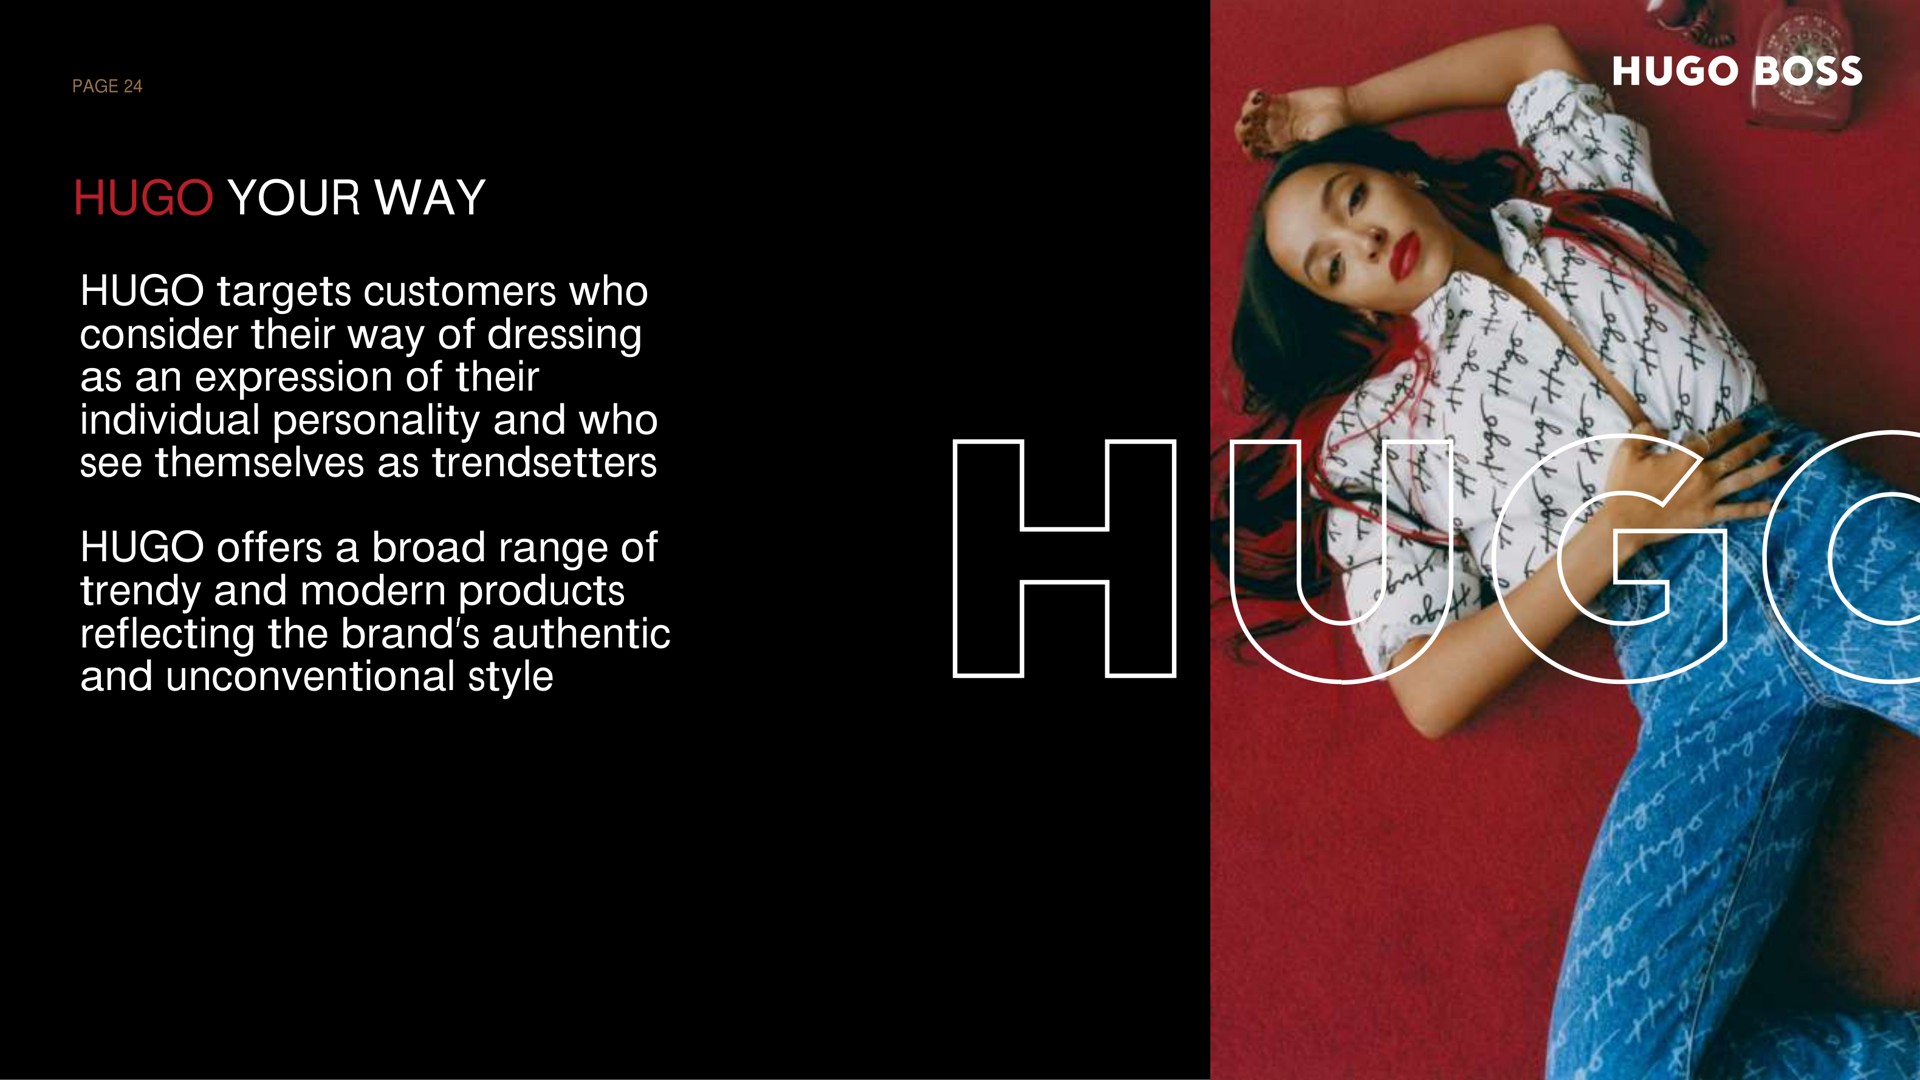 your way targets customers who consider their way of dressing as an expression of their individual personality and who see themselves as offers a broad range of and modern products reflecting the brand authentic and unconventional style | Hugo Boss